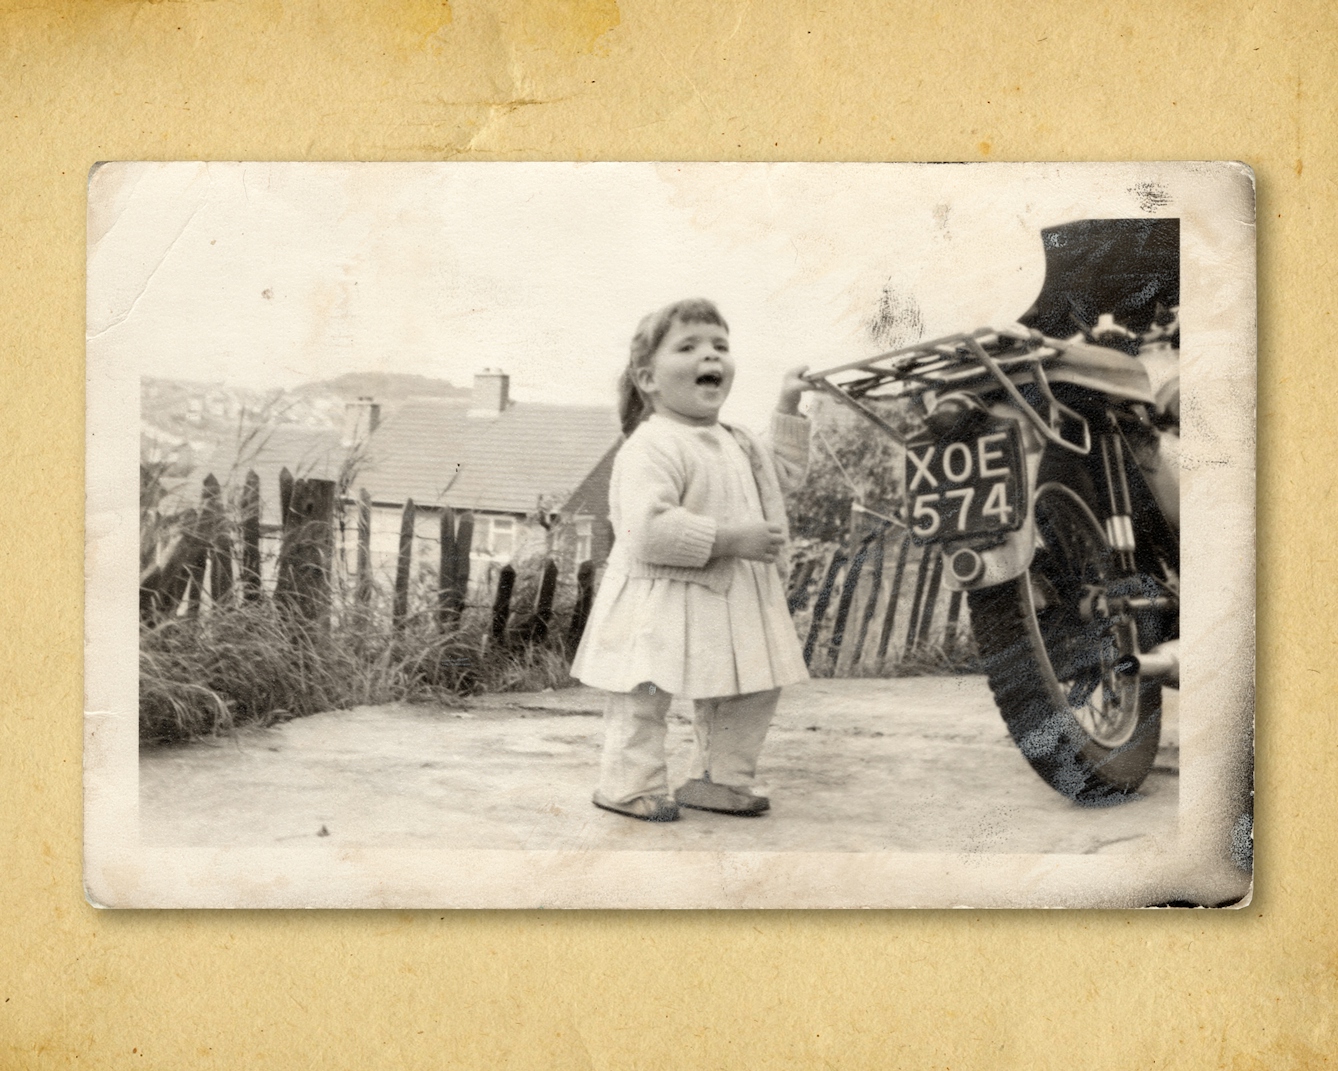 Photograph of a black and white photographic print, resting on a brown paper textured background. The print shows a small young girl in a dress, trousers and a cardigan standing outside. Her left hand is holding on to the pannier rack of a motorcycle which is just appearing into the frame. The motorbike has the registration plat 'XOE574'. The young girl has her mouth open as if mid shout. She has blocks of different sizes under her feet. Behind her in the background is a wooden fence, grasses and the roofs of houses in the distance.